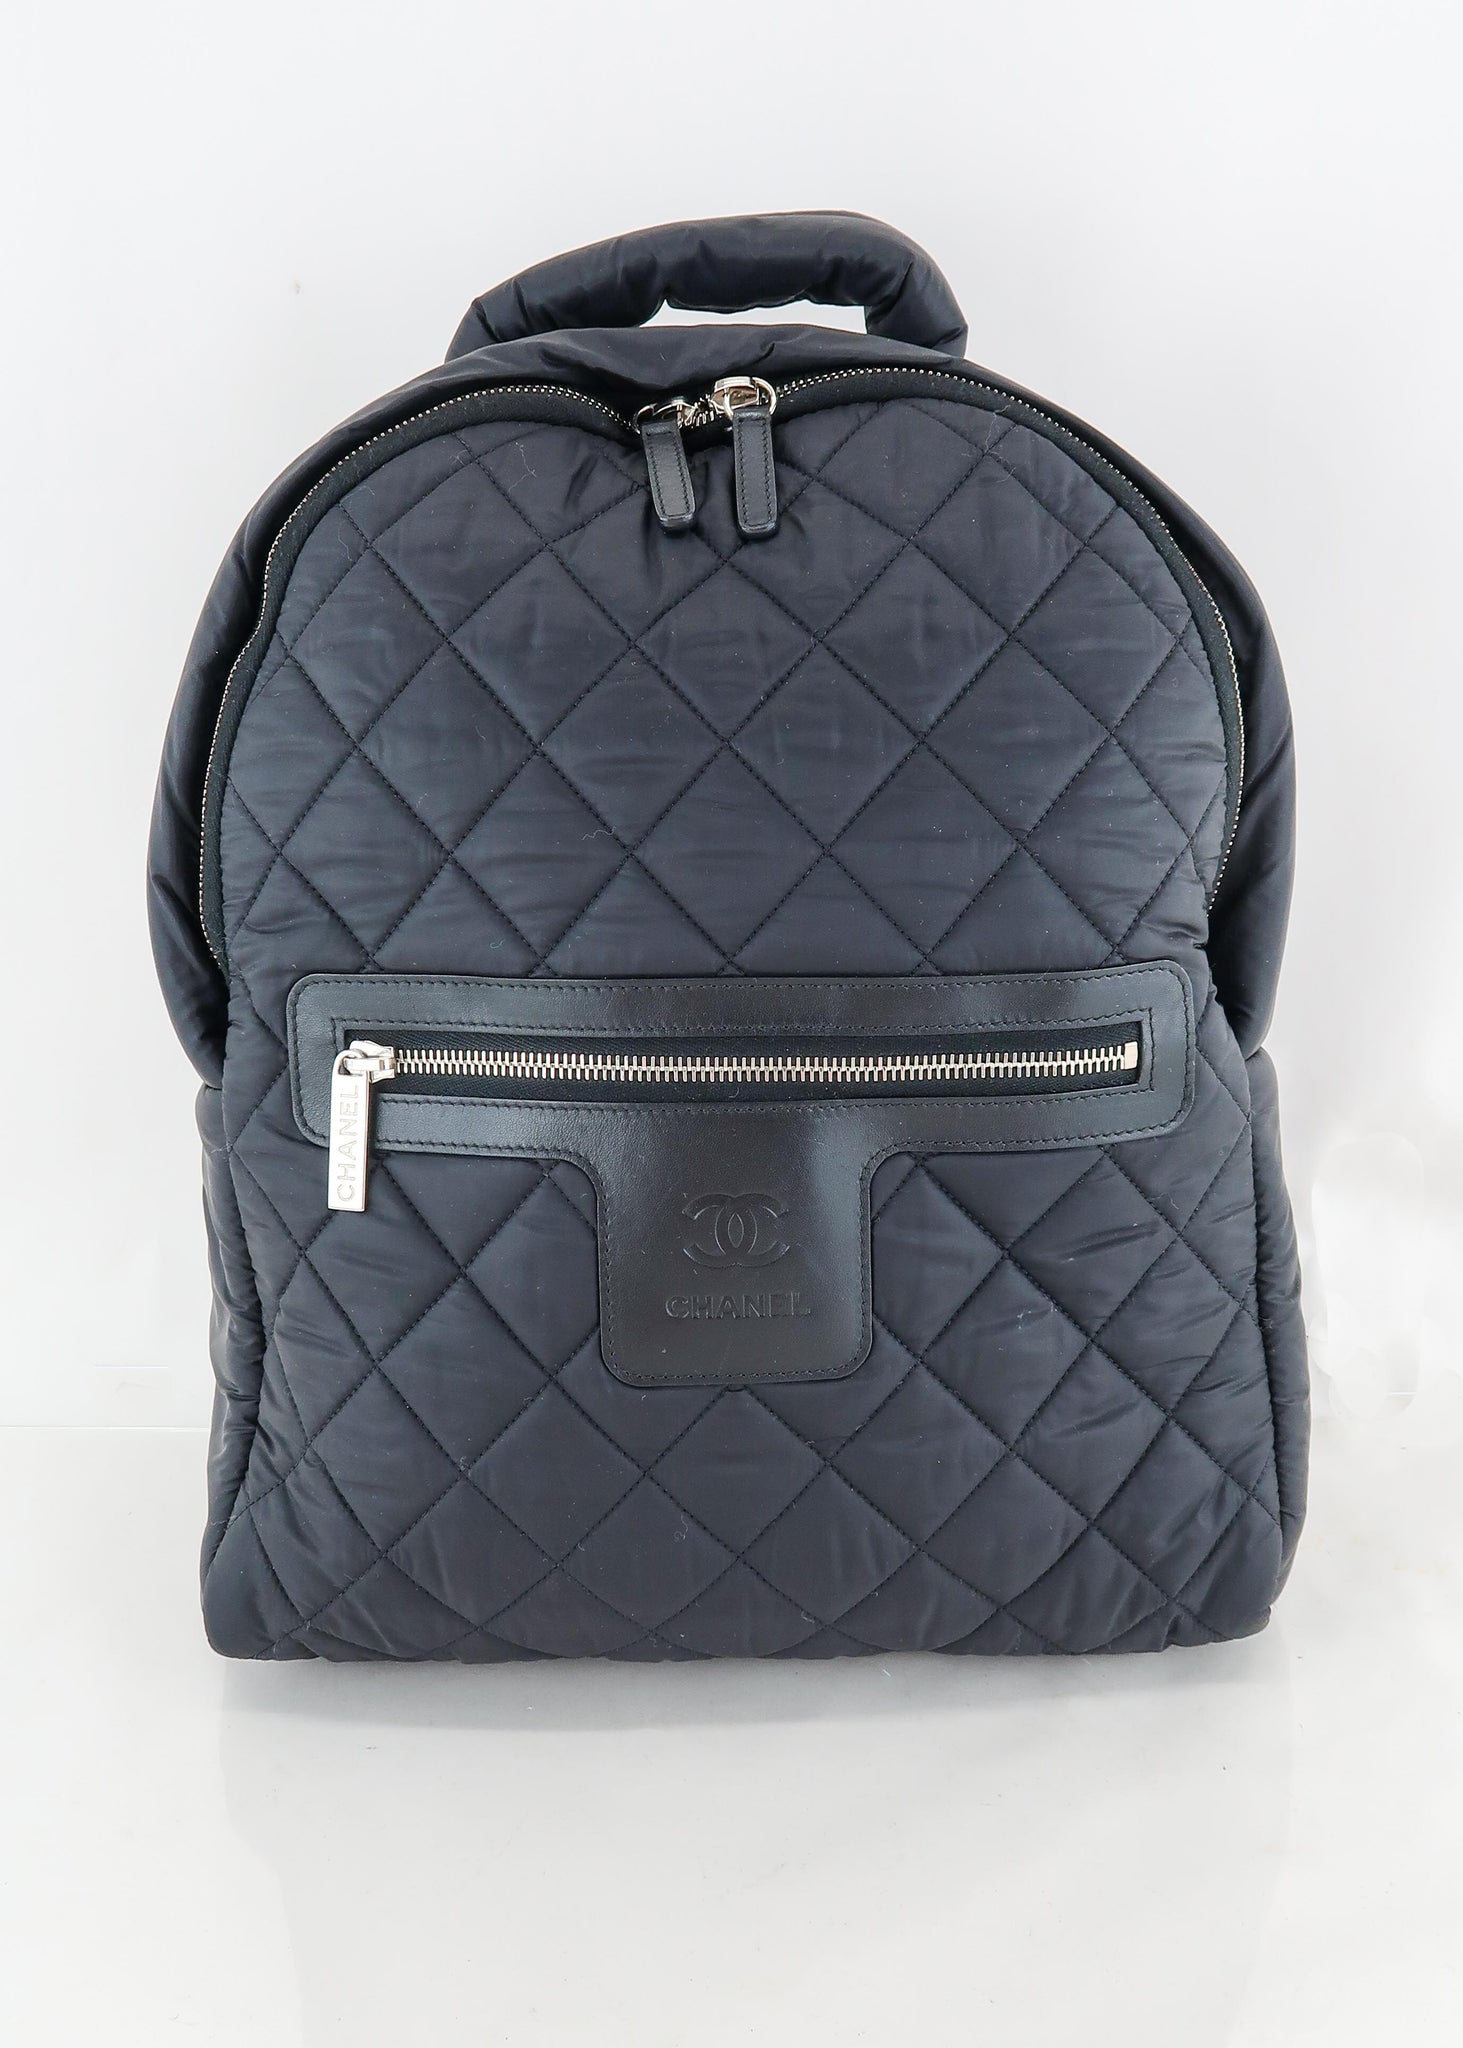 Chanel Dark White Quilted Nylon Coco Cocoon Tote Bag